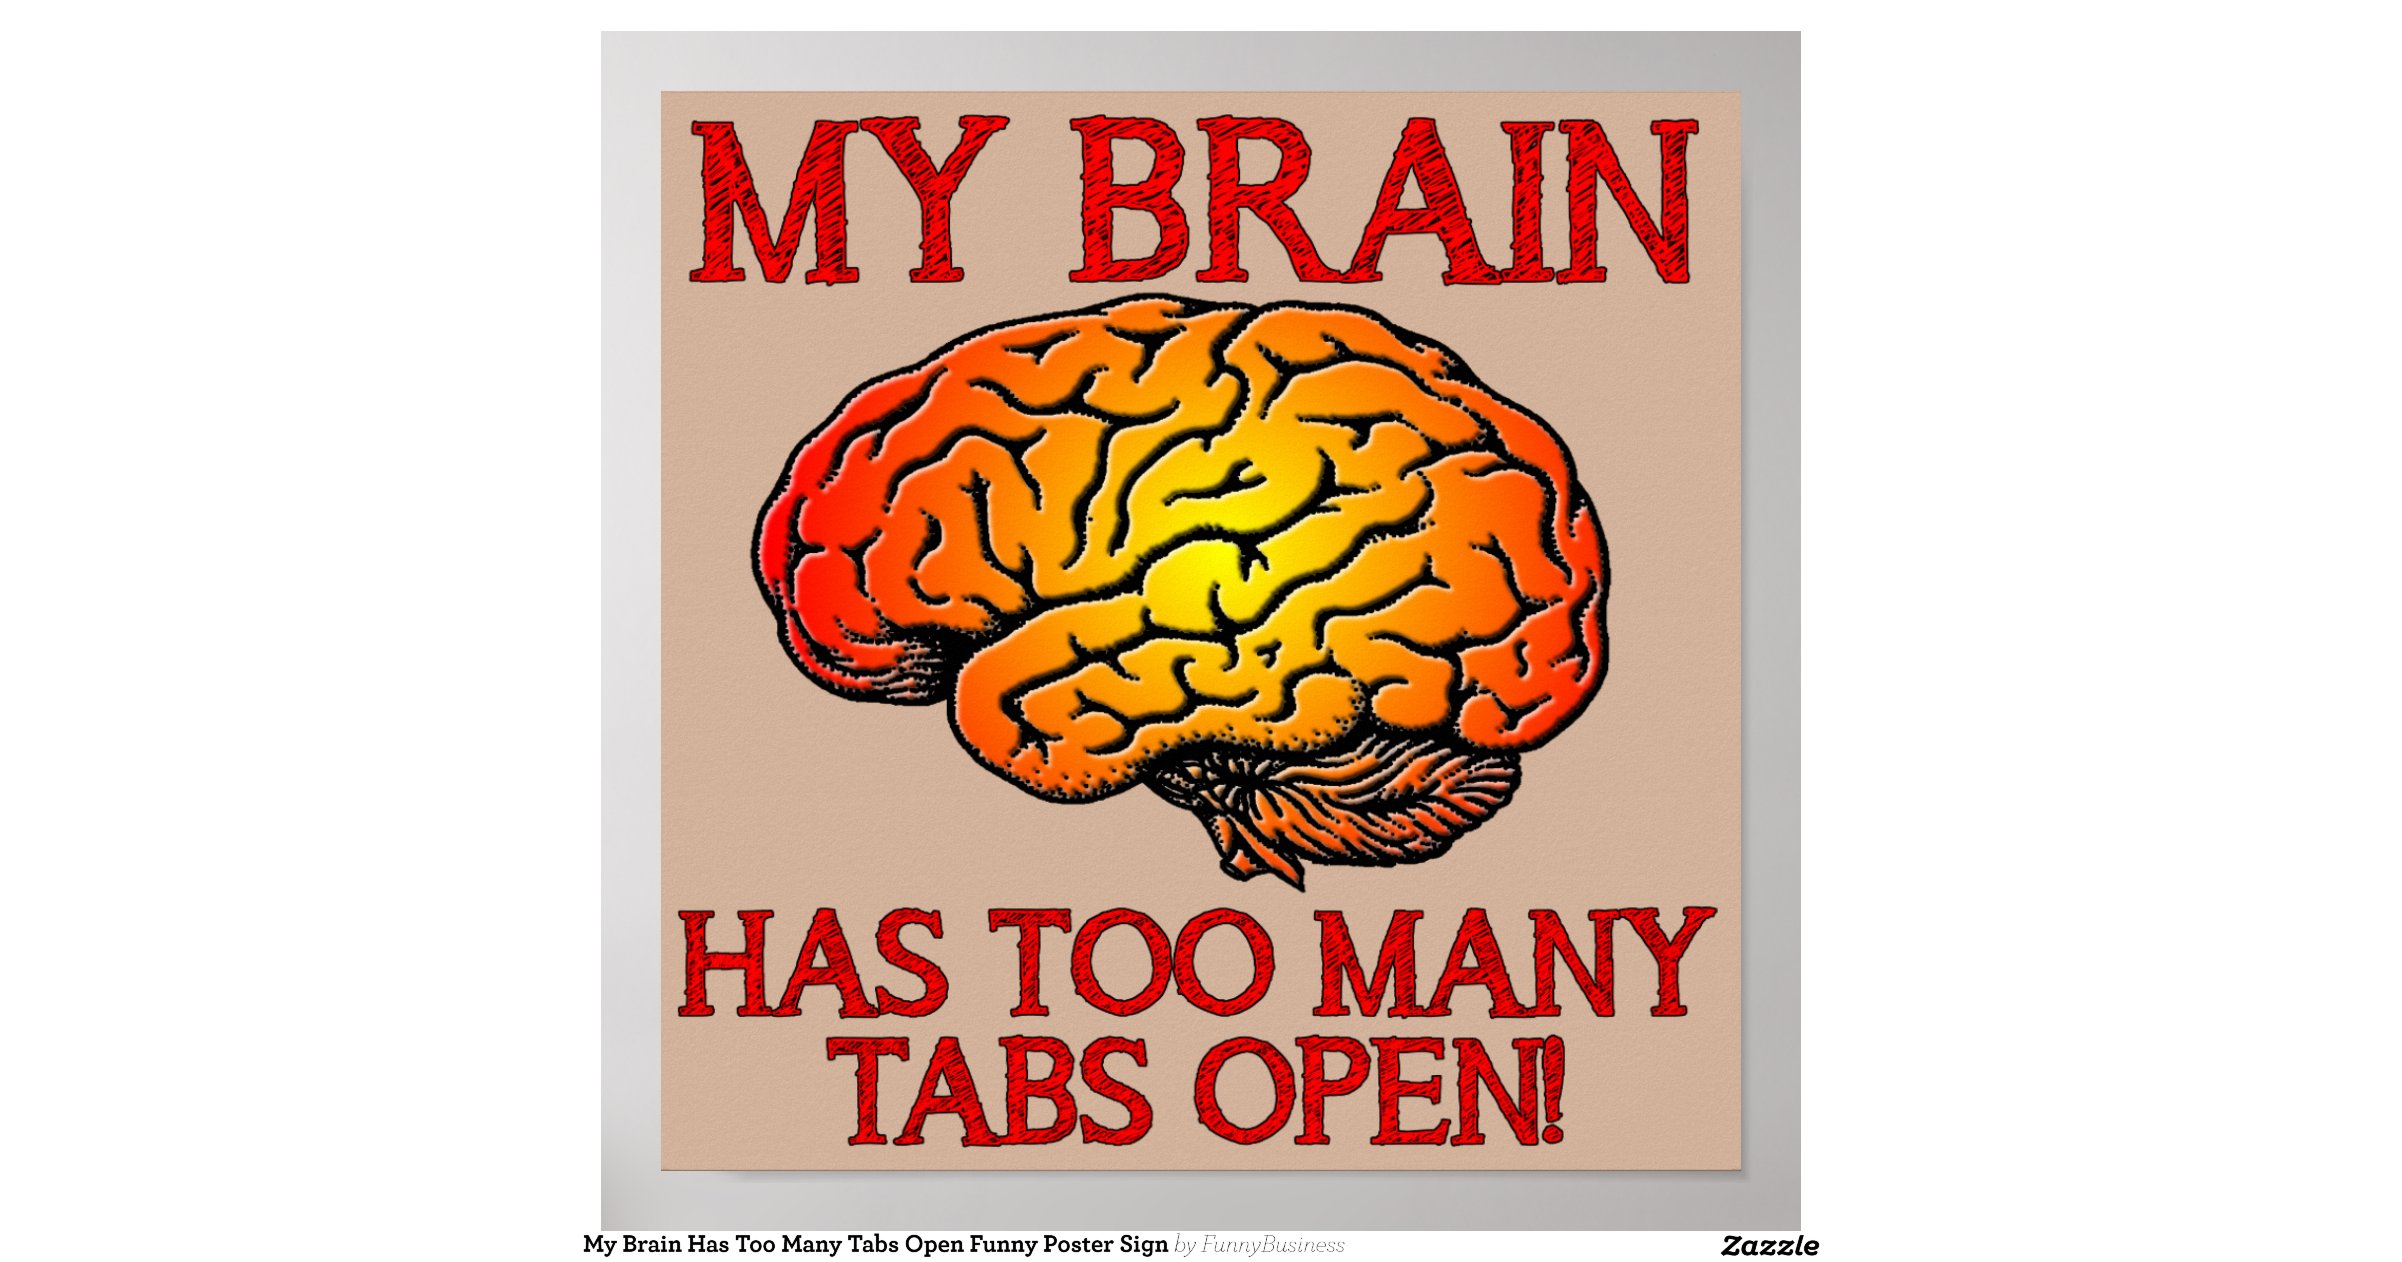 My Brain Has Too Many Tabs Open Funny Poster Sign Zazzle